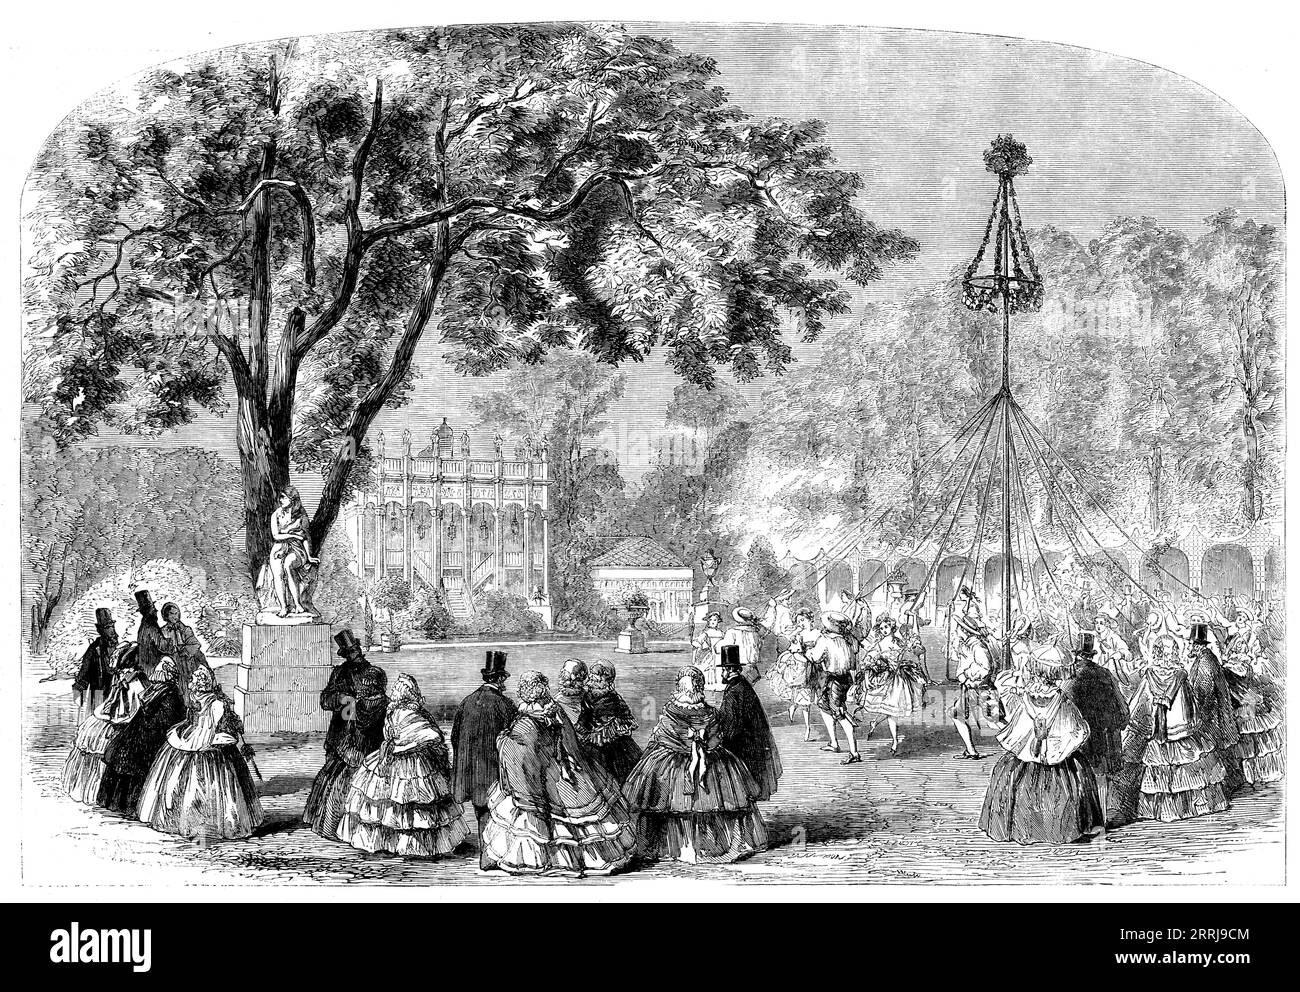 Cremorne Gardens - the Maypole Dance, 1858. Pleasure gardens in Chelsea, London. 'This delightful place of public resort was...the centre of great attraction, and was crowded by a brilliant company, who were brought together to testify their admiration of the manner in which the spirited proprietor - Mr. T. Simpson - has managed these gardens. As early as three o'clock the gardens were open to the public, when maypole and and morris dancing, such as delighted our ancestors, took place in the gardens, which were exquisitely decorated with flags and banners...It would be in vain to attempt to en Stock Photo